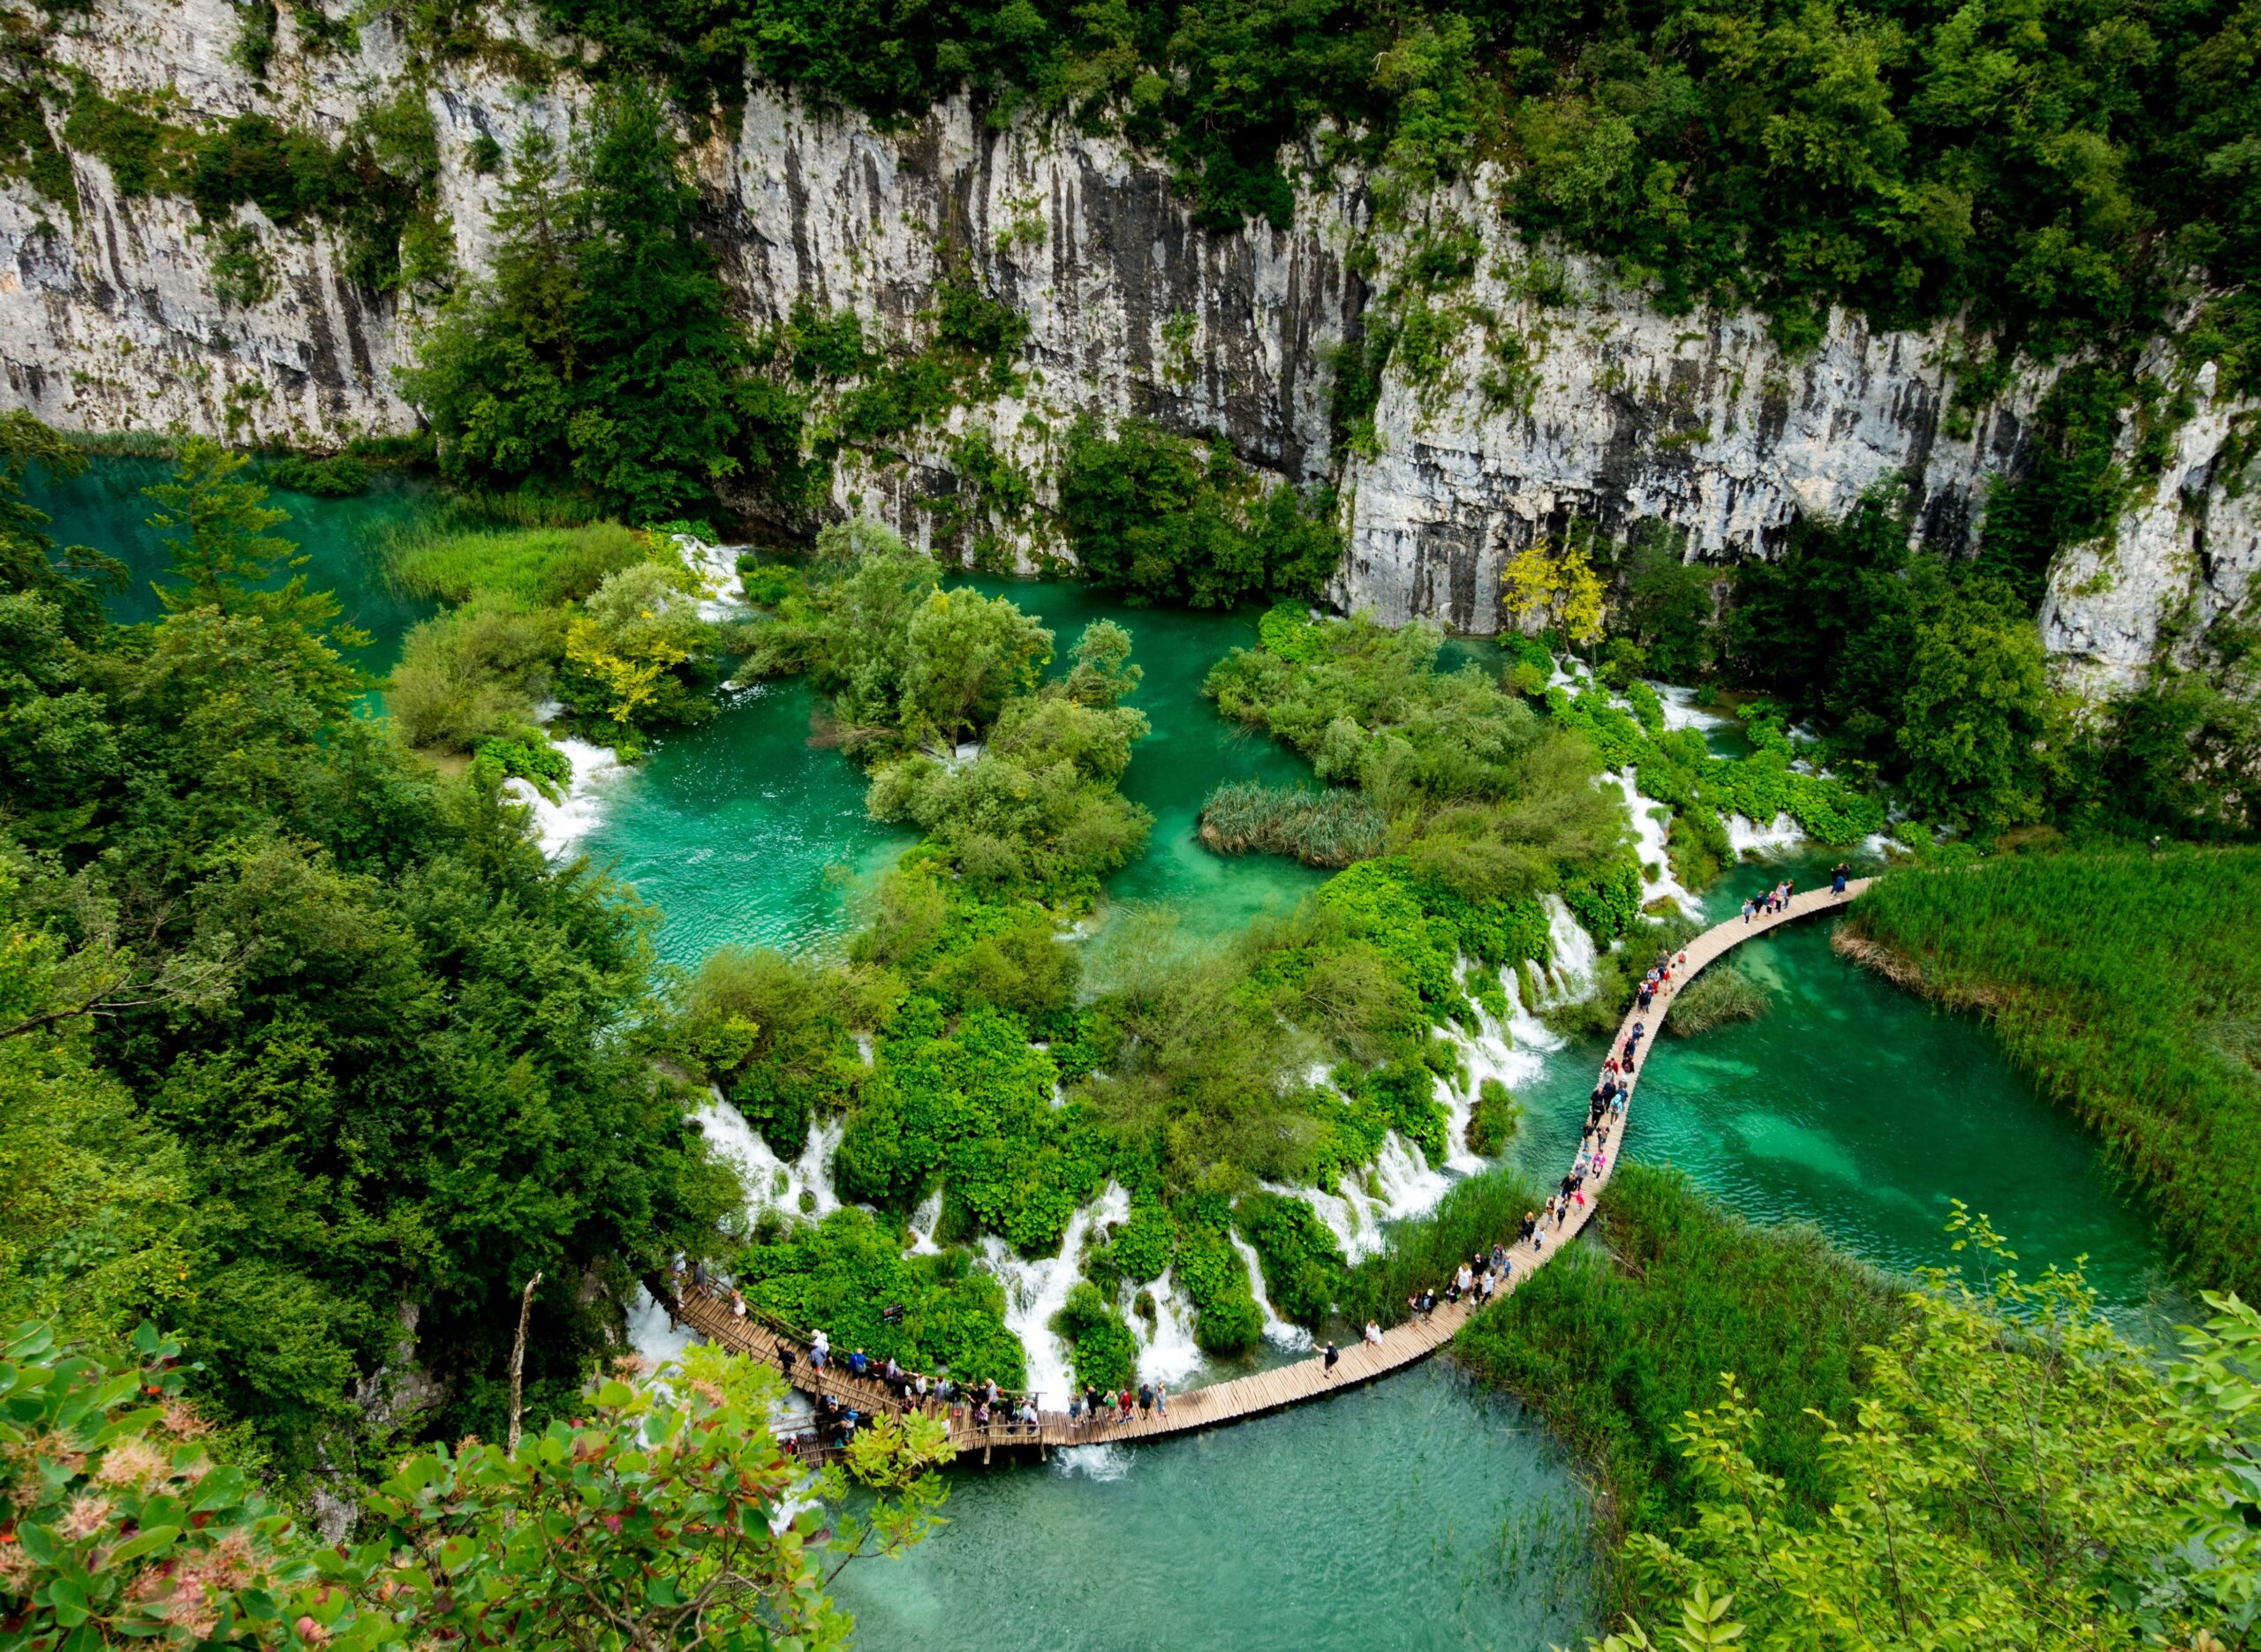 Tourists walking around the beautiful Plitvice Lakes National Park located in Croatia